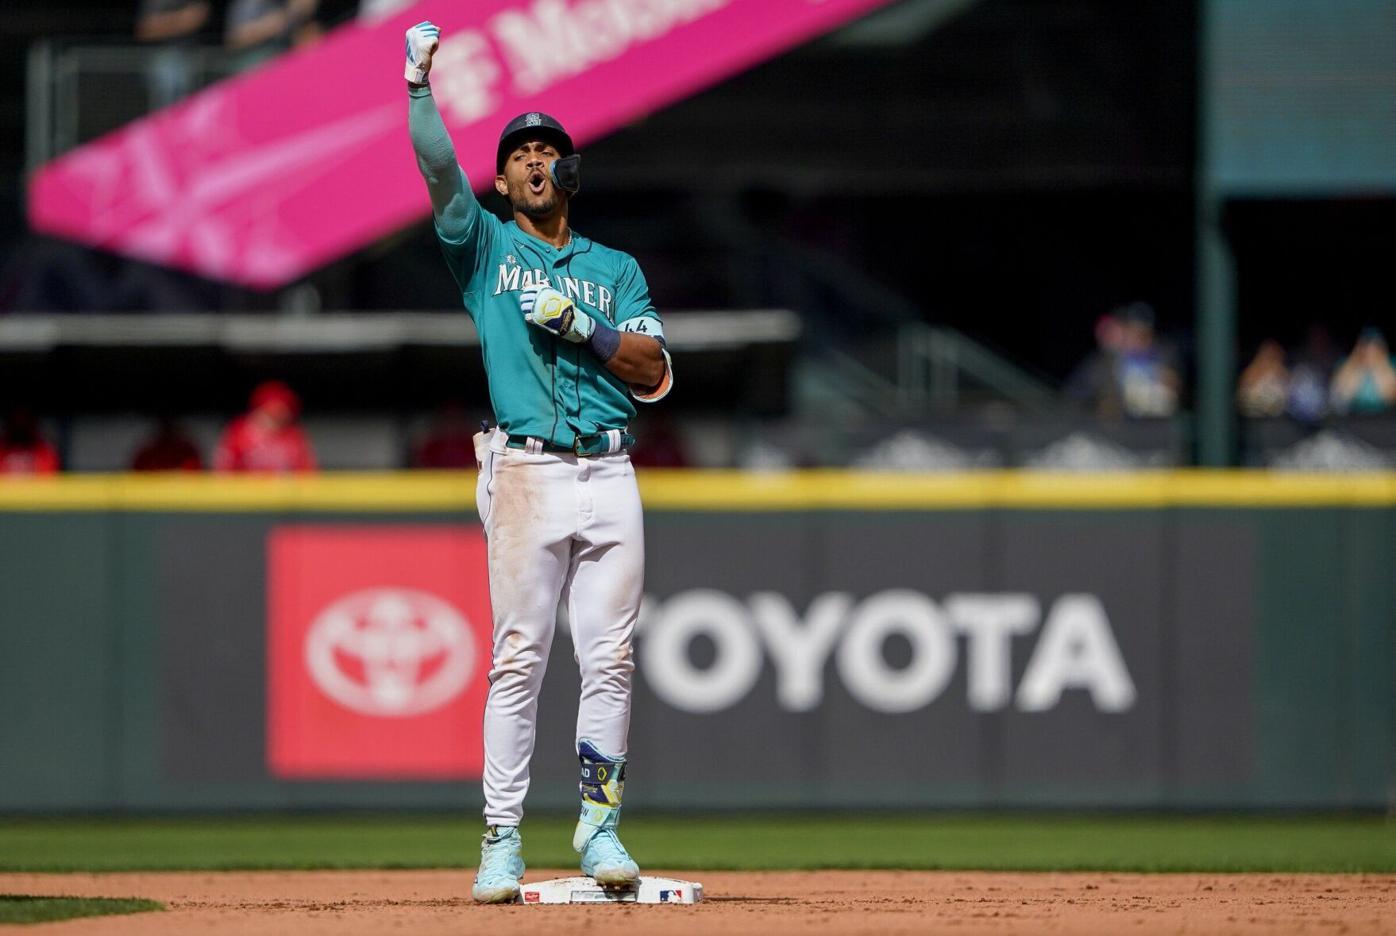 Luis Castillo, Julio Rodriguez doing their best to carry Mariners into  playoffs, Mariners